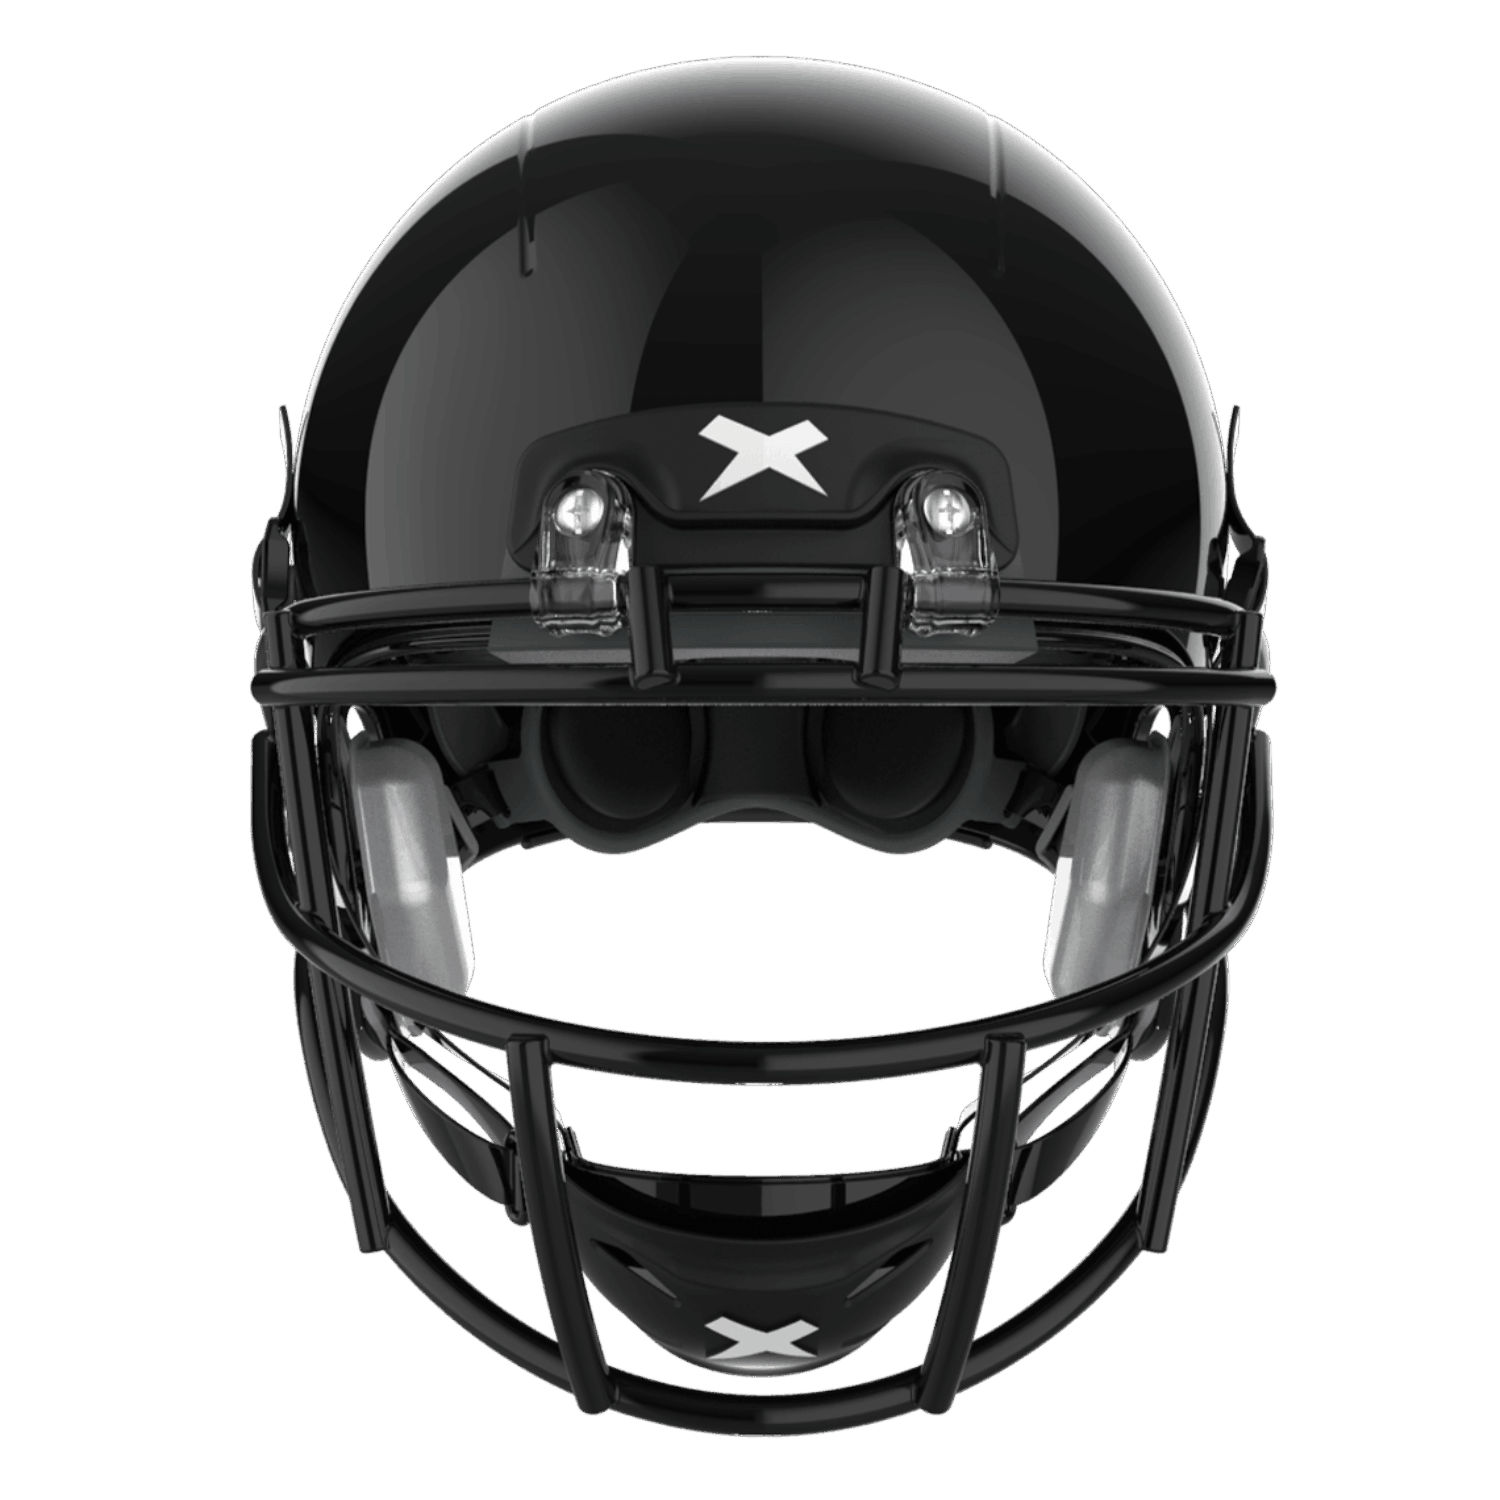 Front view X2E+ football helmet with black shell and black Prime facemask.